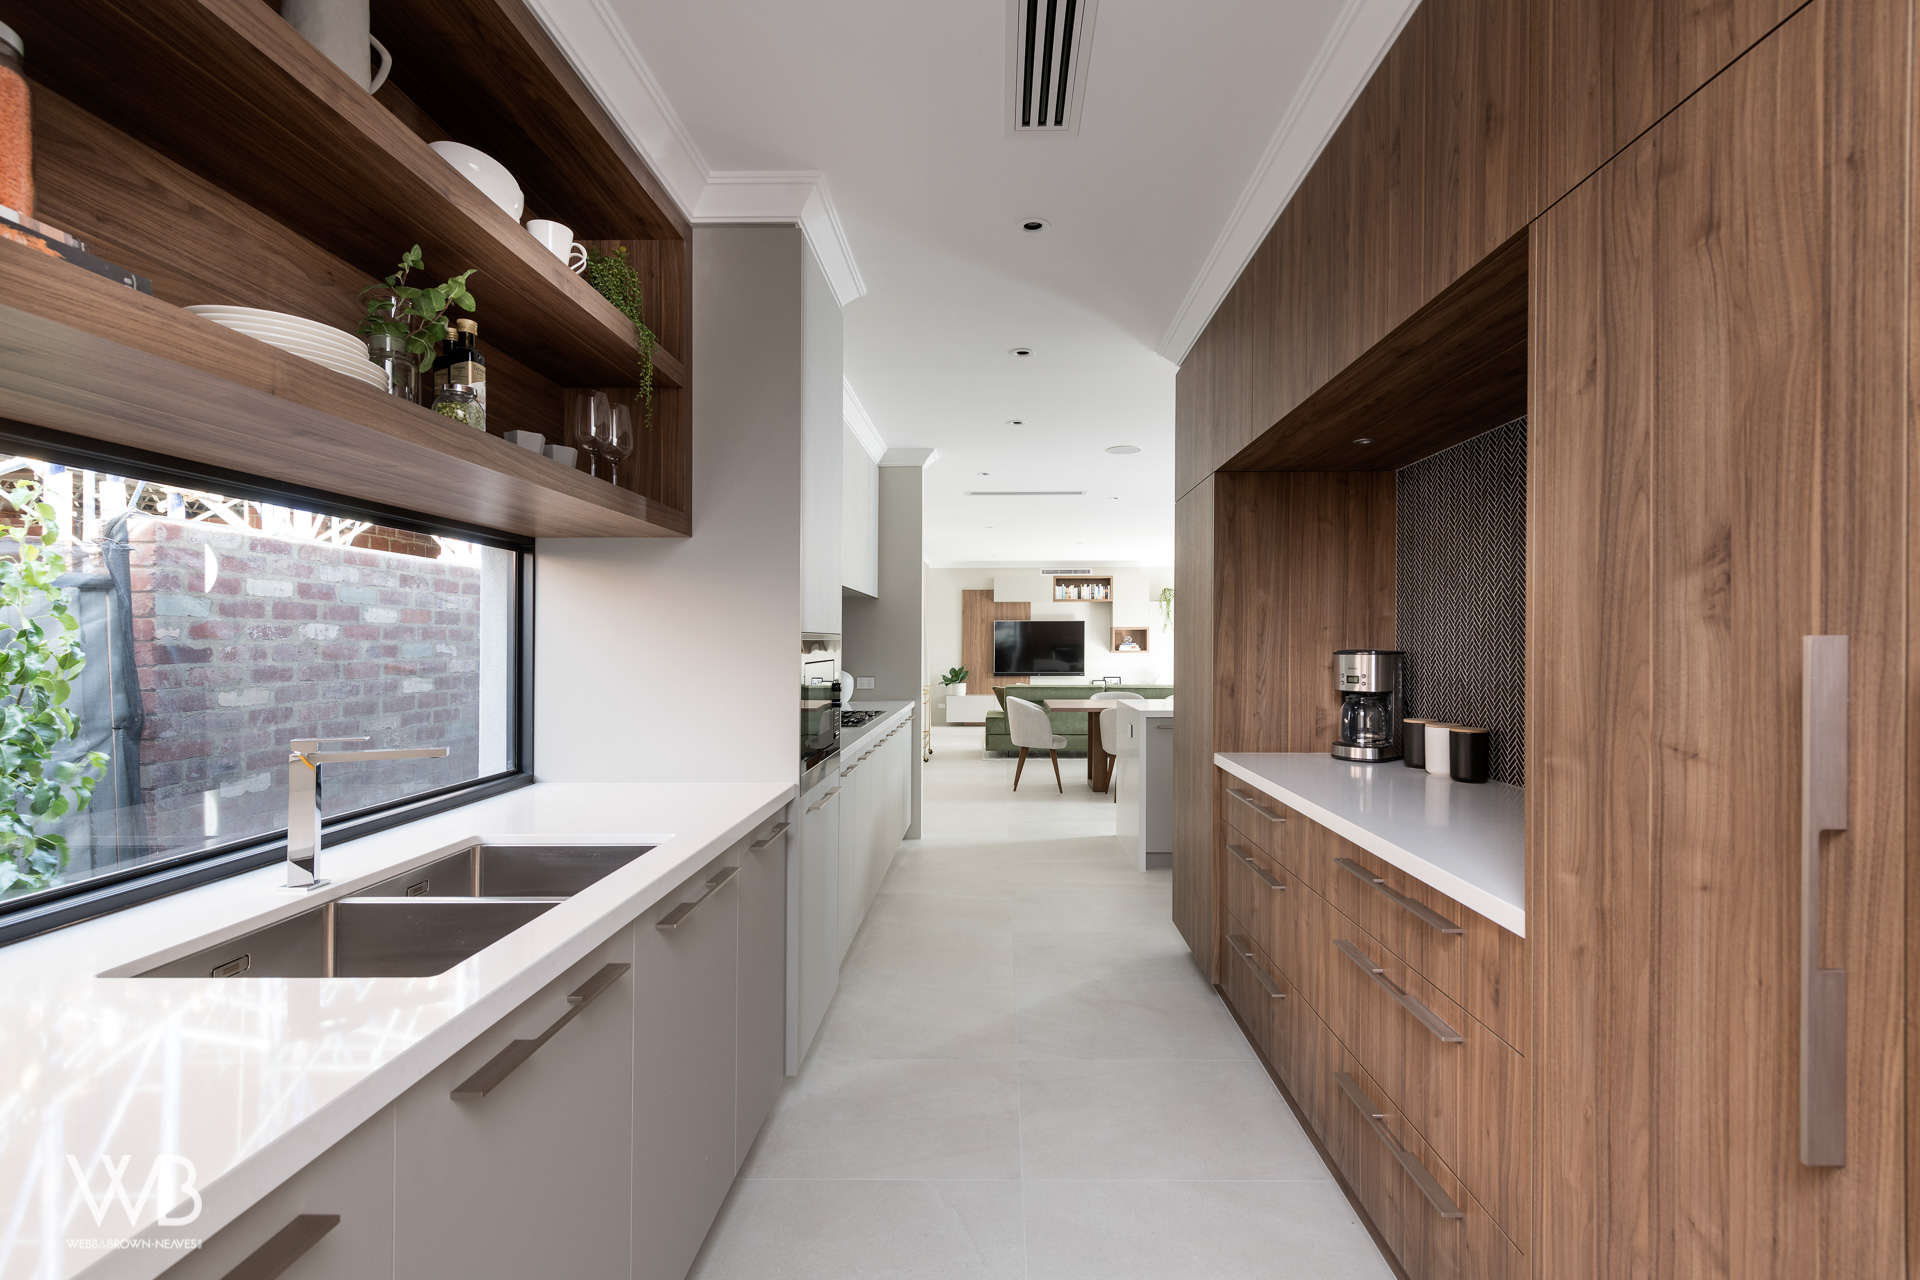  Kitchen designed by Jess O’Shea Designs for Webb and Brown-Neaves. Moda Display home. Made by The Maker Designer Kitchens. Dianella, Perth, Western Australia 